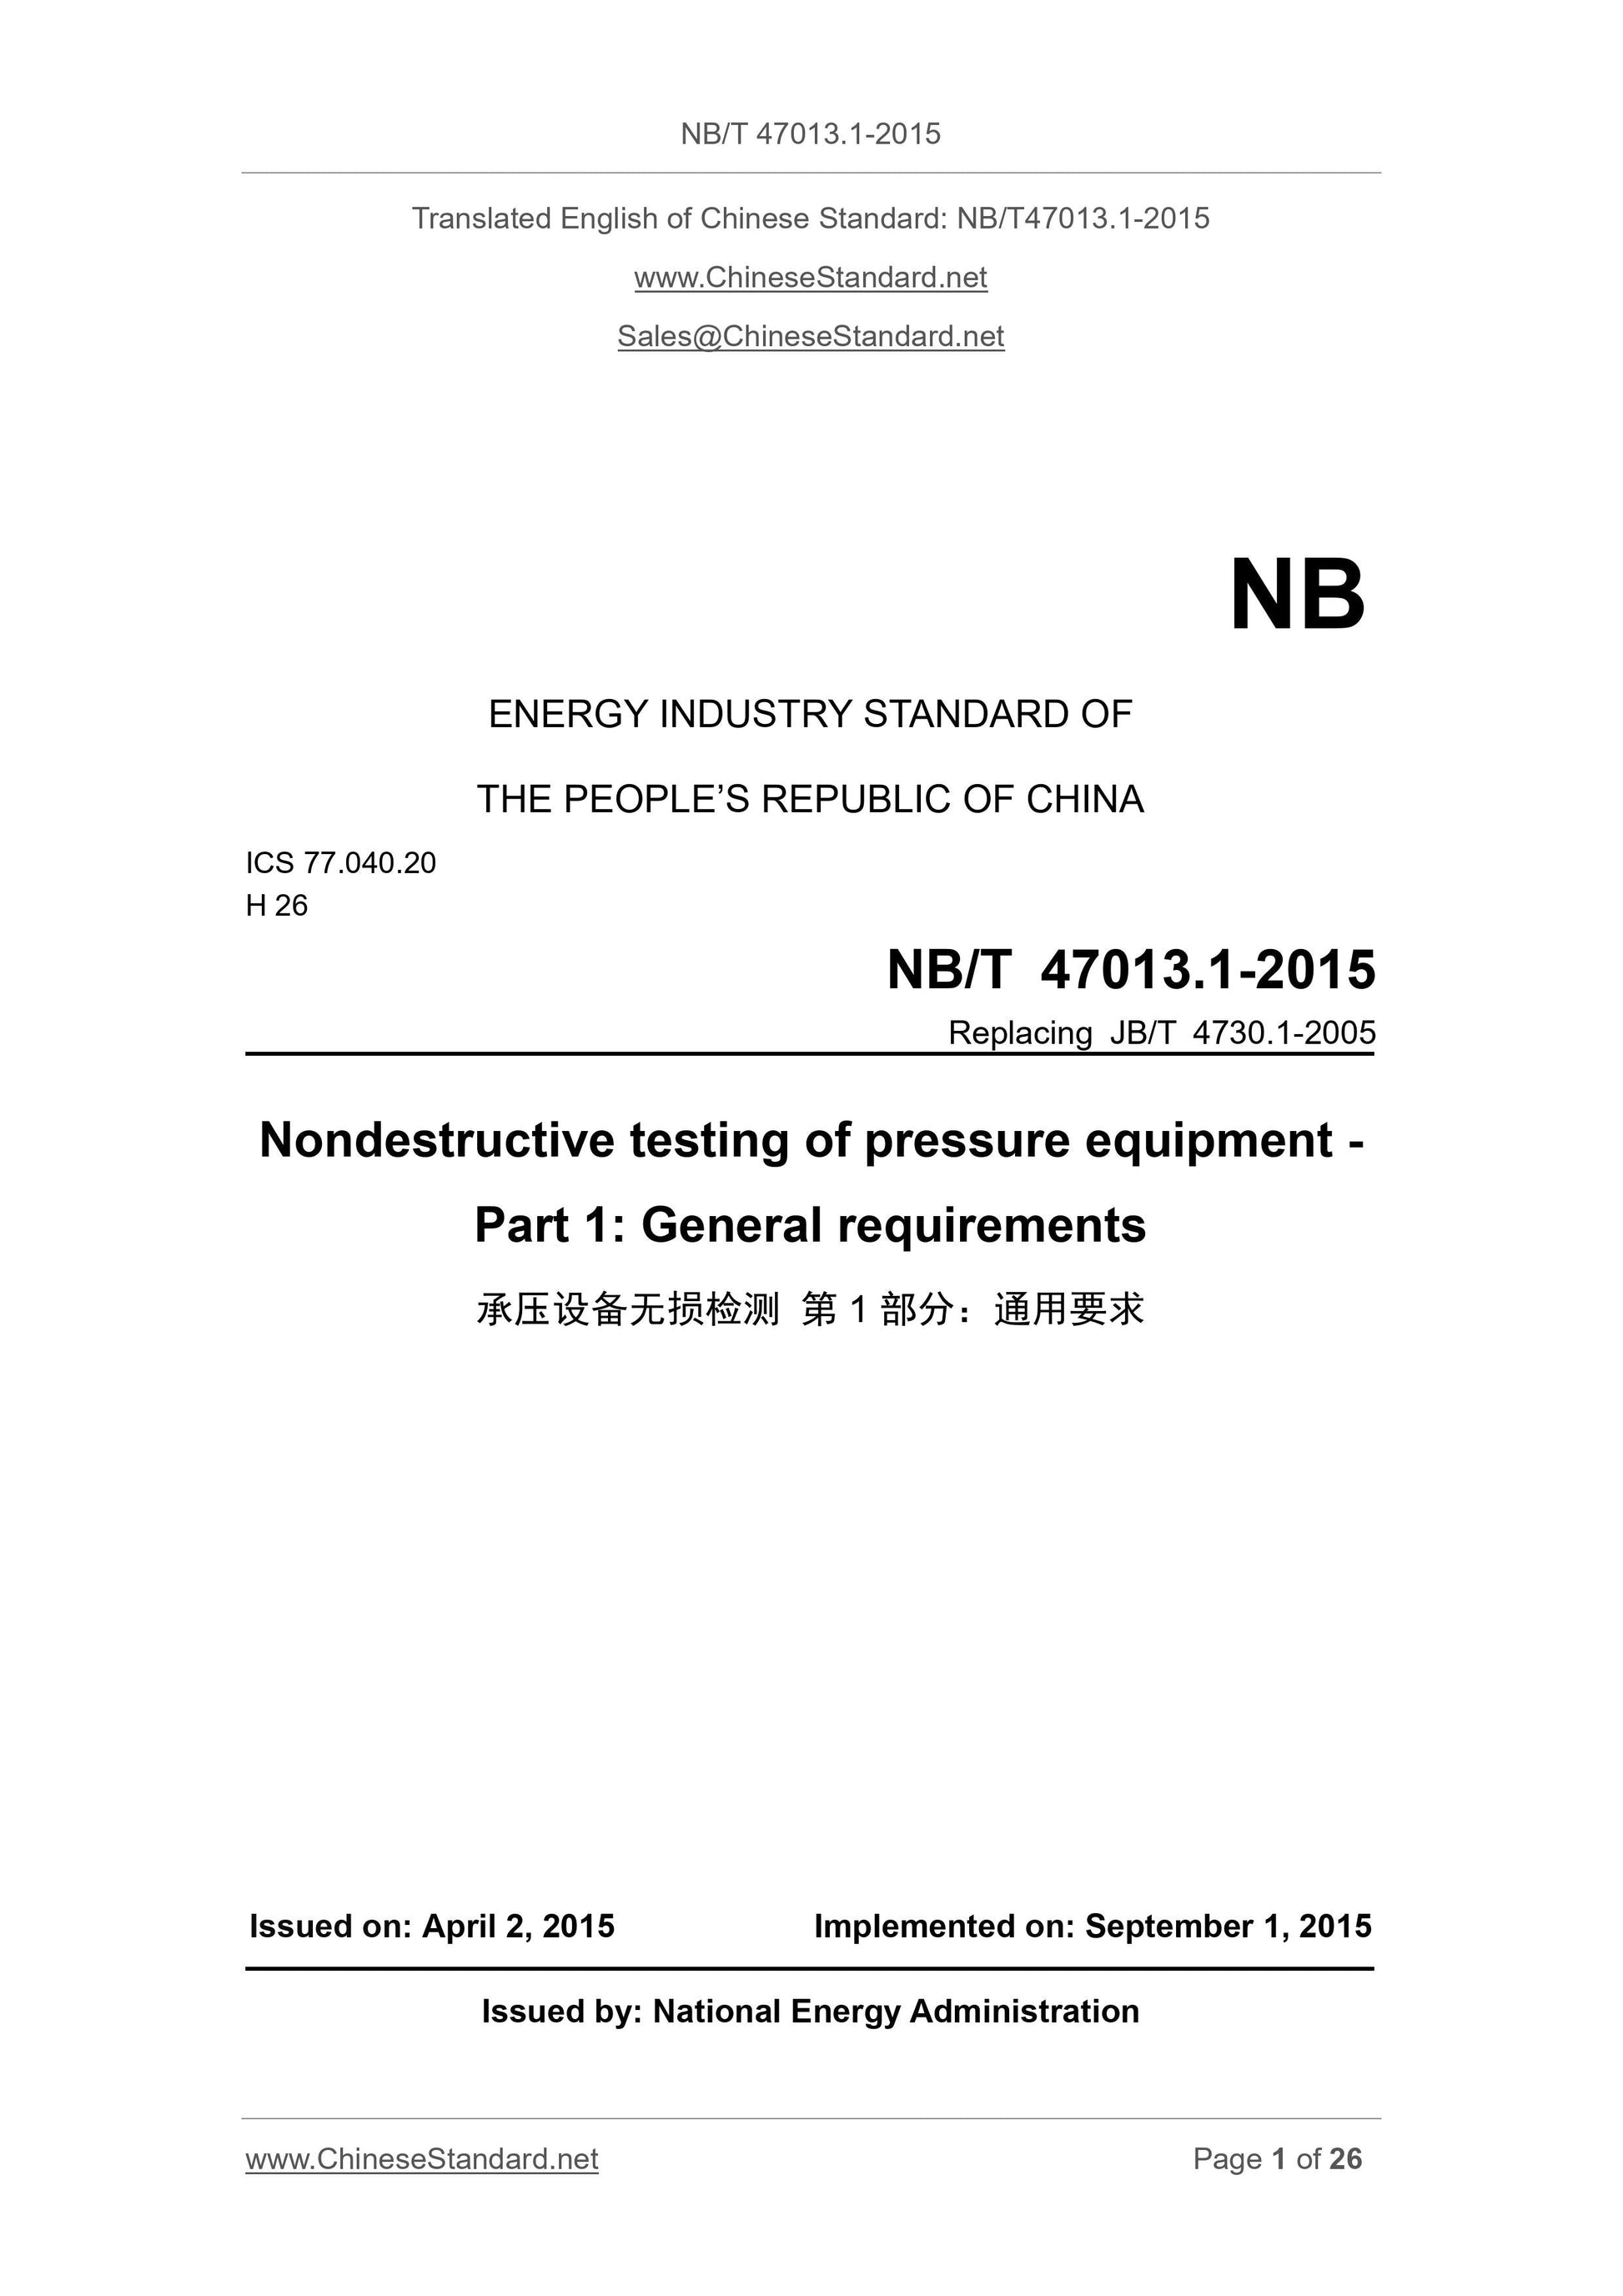 NB/T 47013.1-2015 Page 1